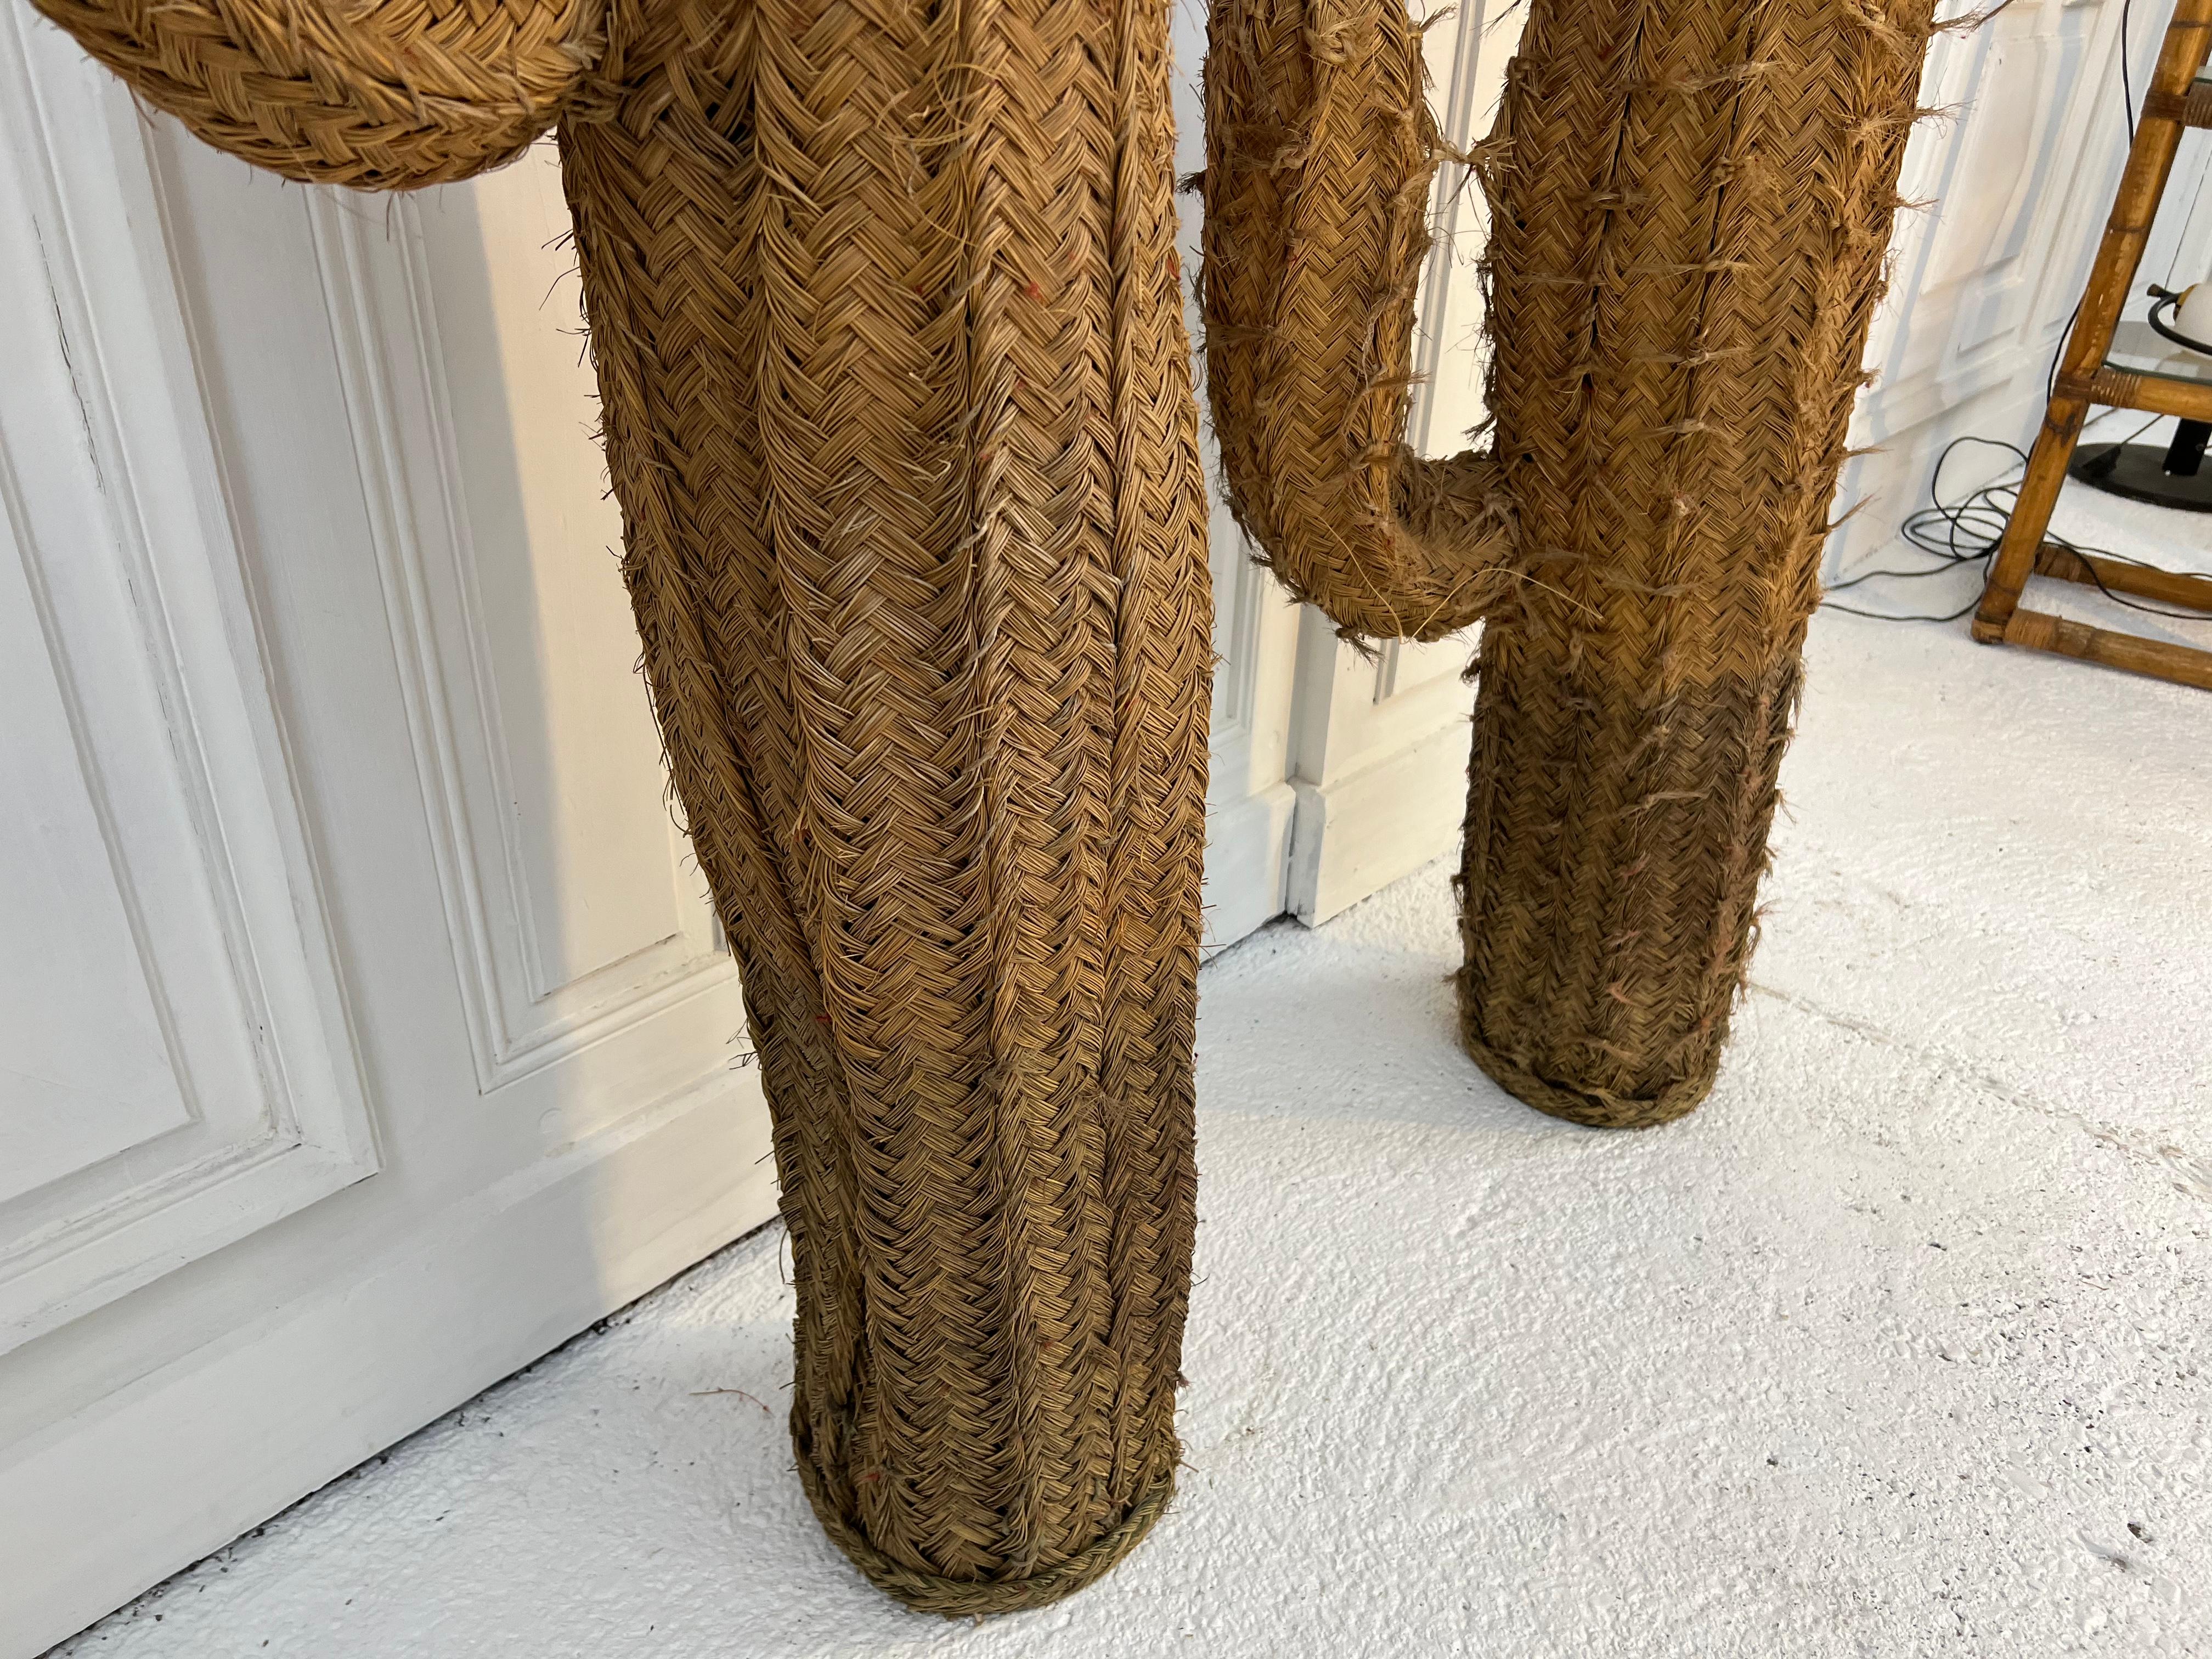 Large Wicker Cactus, 1970s Garden’s Decoration For Sale 2